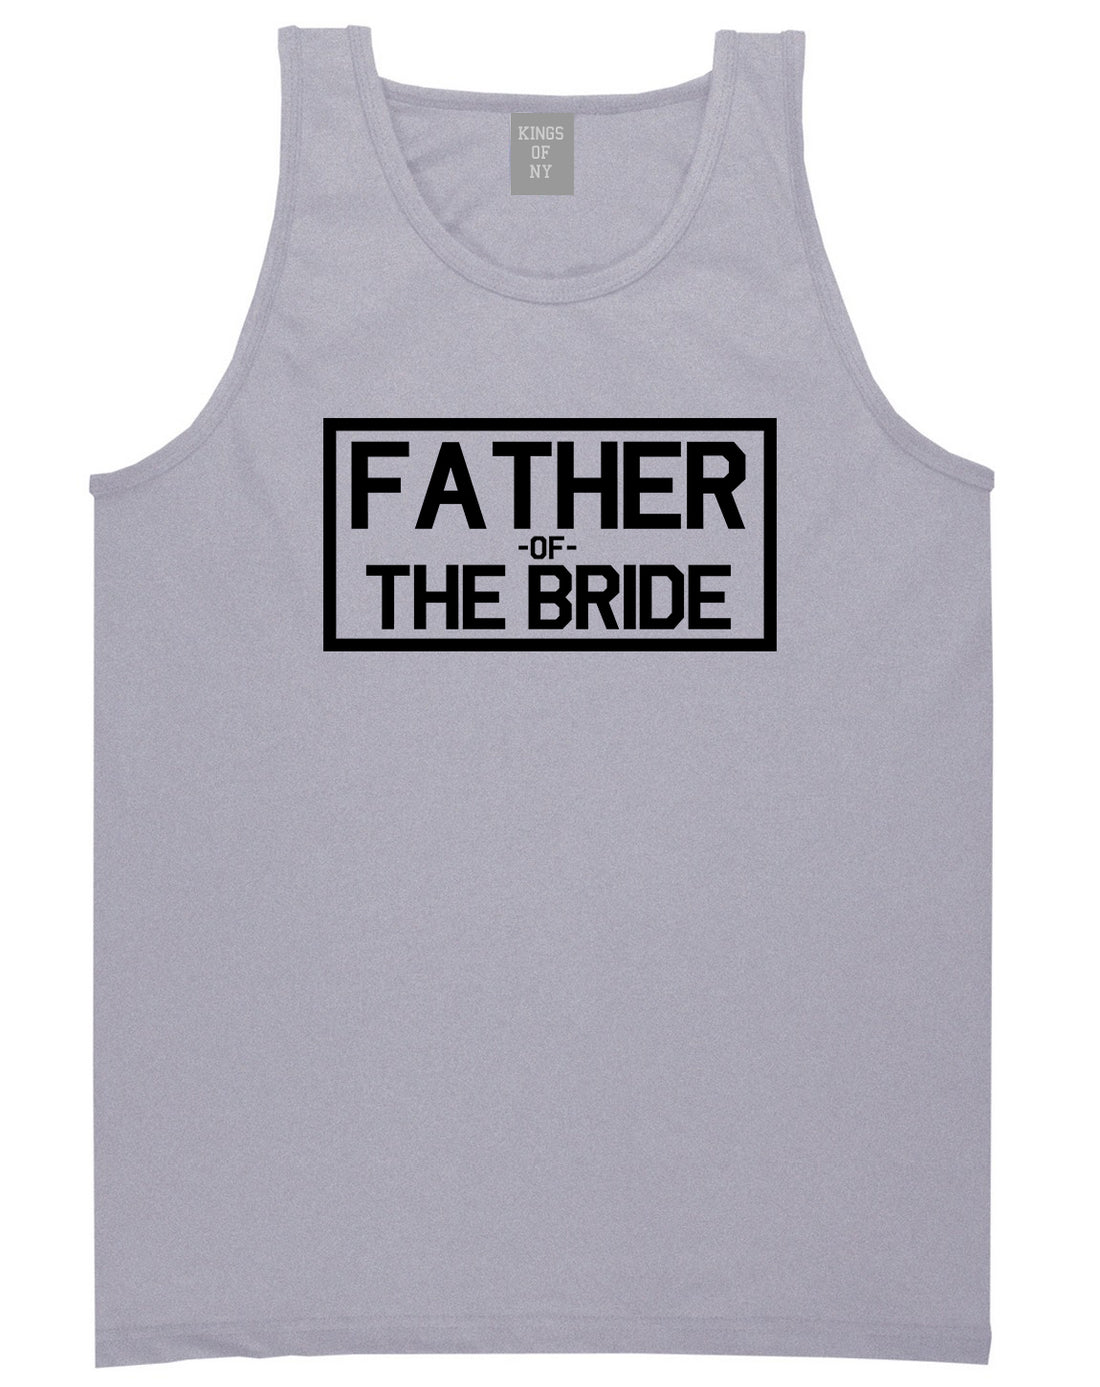 Father_Of_The_Bride Mens Grey Tank Top Shirt by Kings Of NY